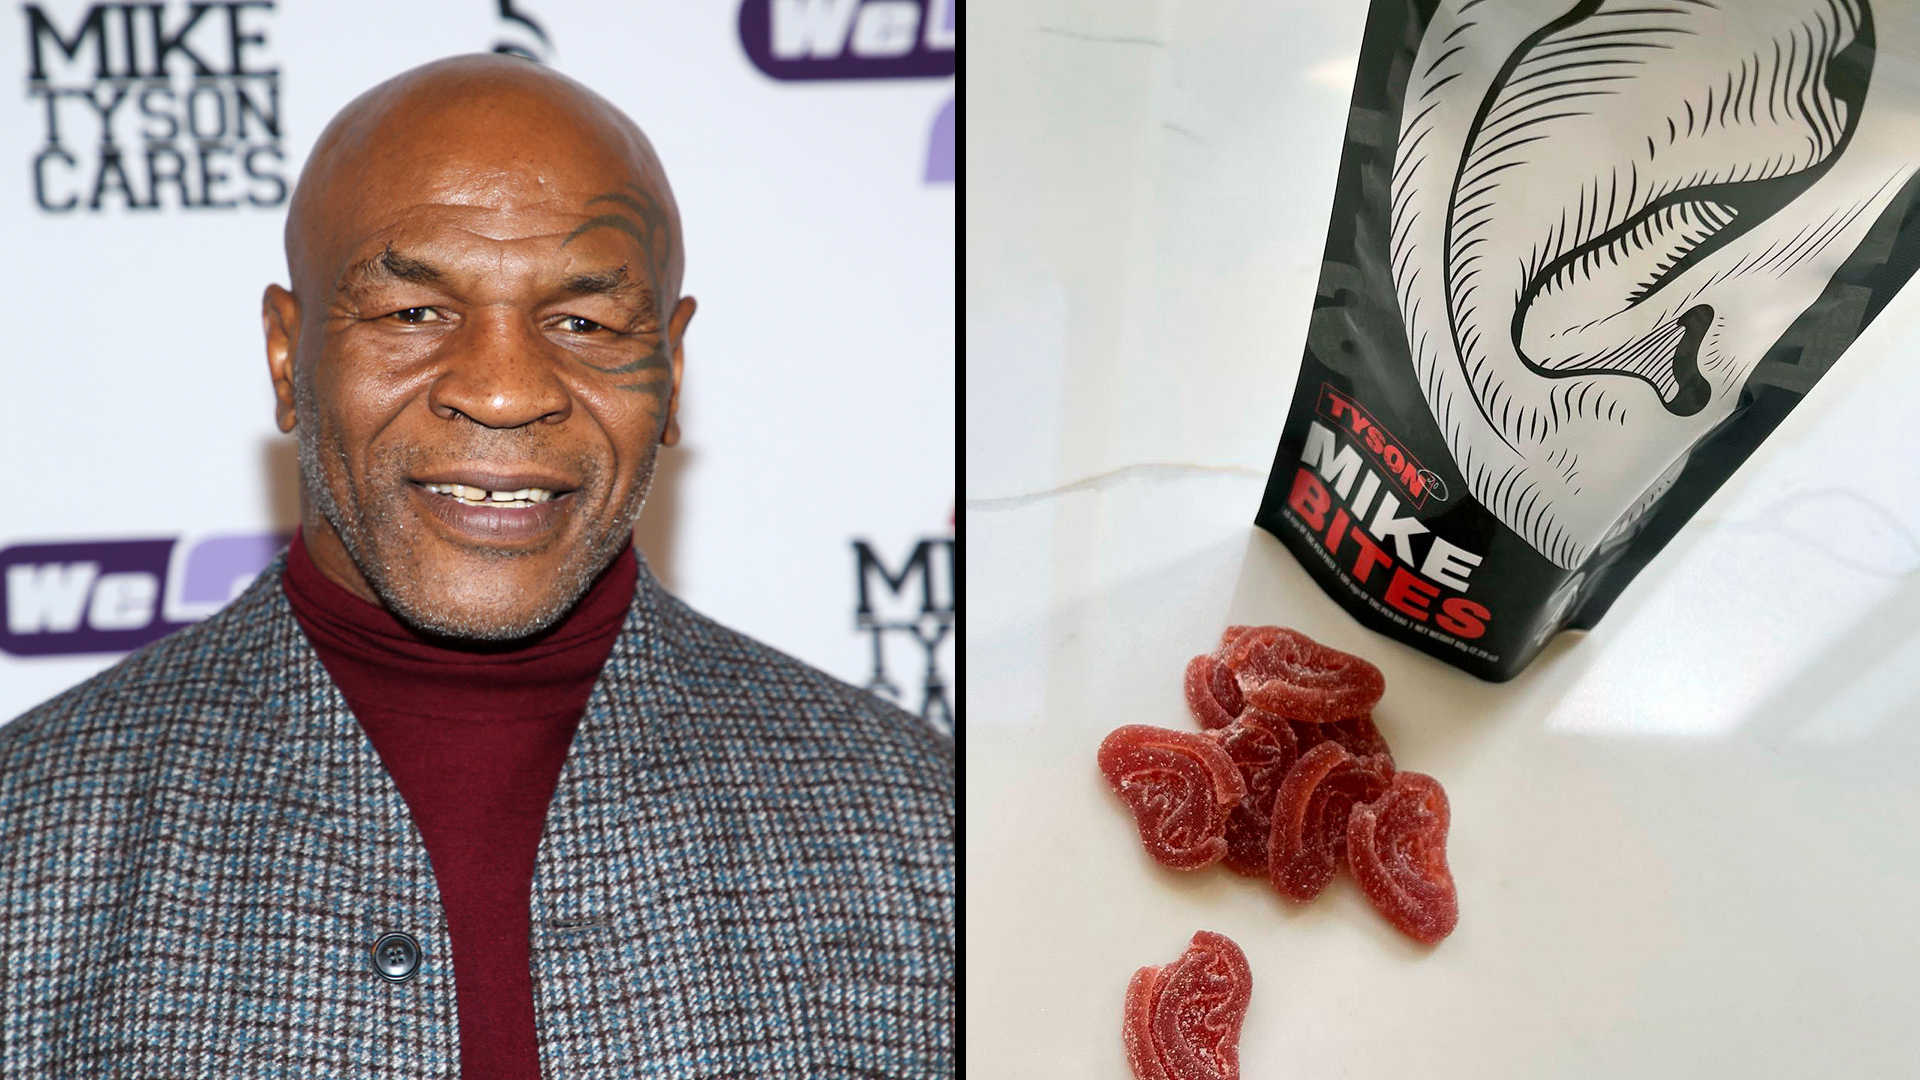 Mike Tyson Launches Ear-Shaped Edibles Nearly 25 Years After The Infamous Boxing Matchup